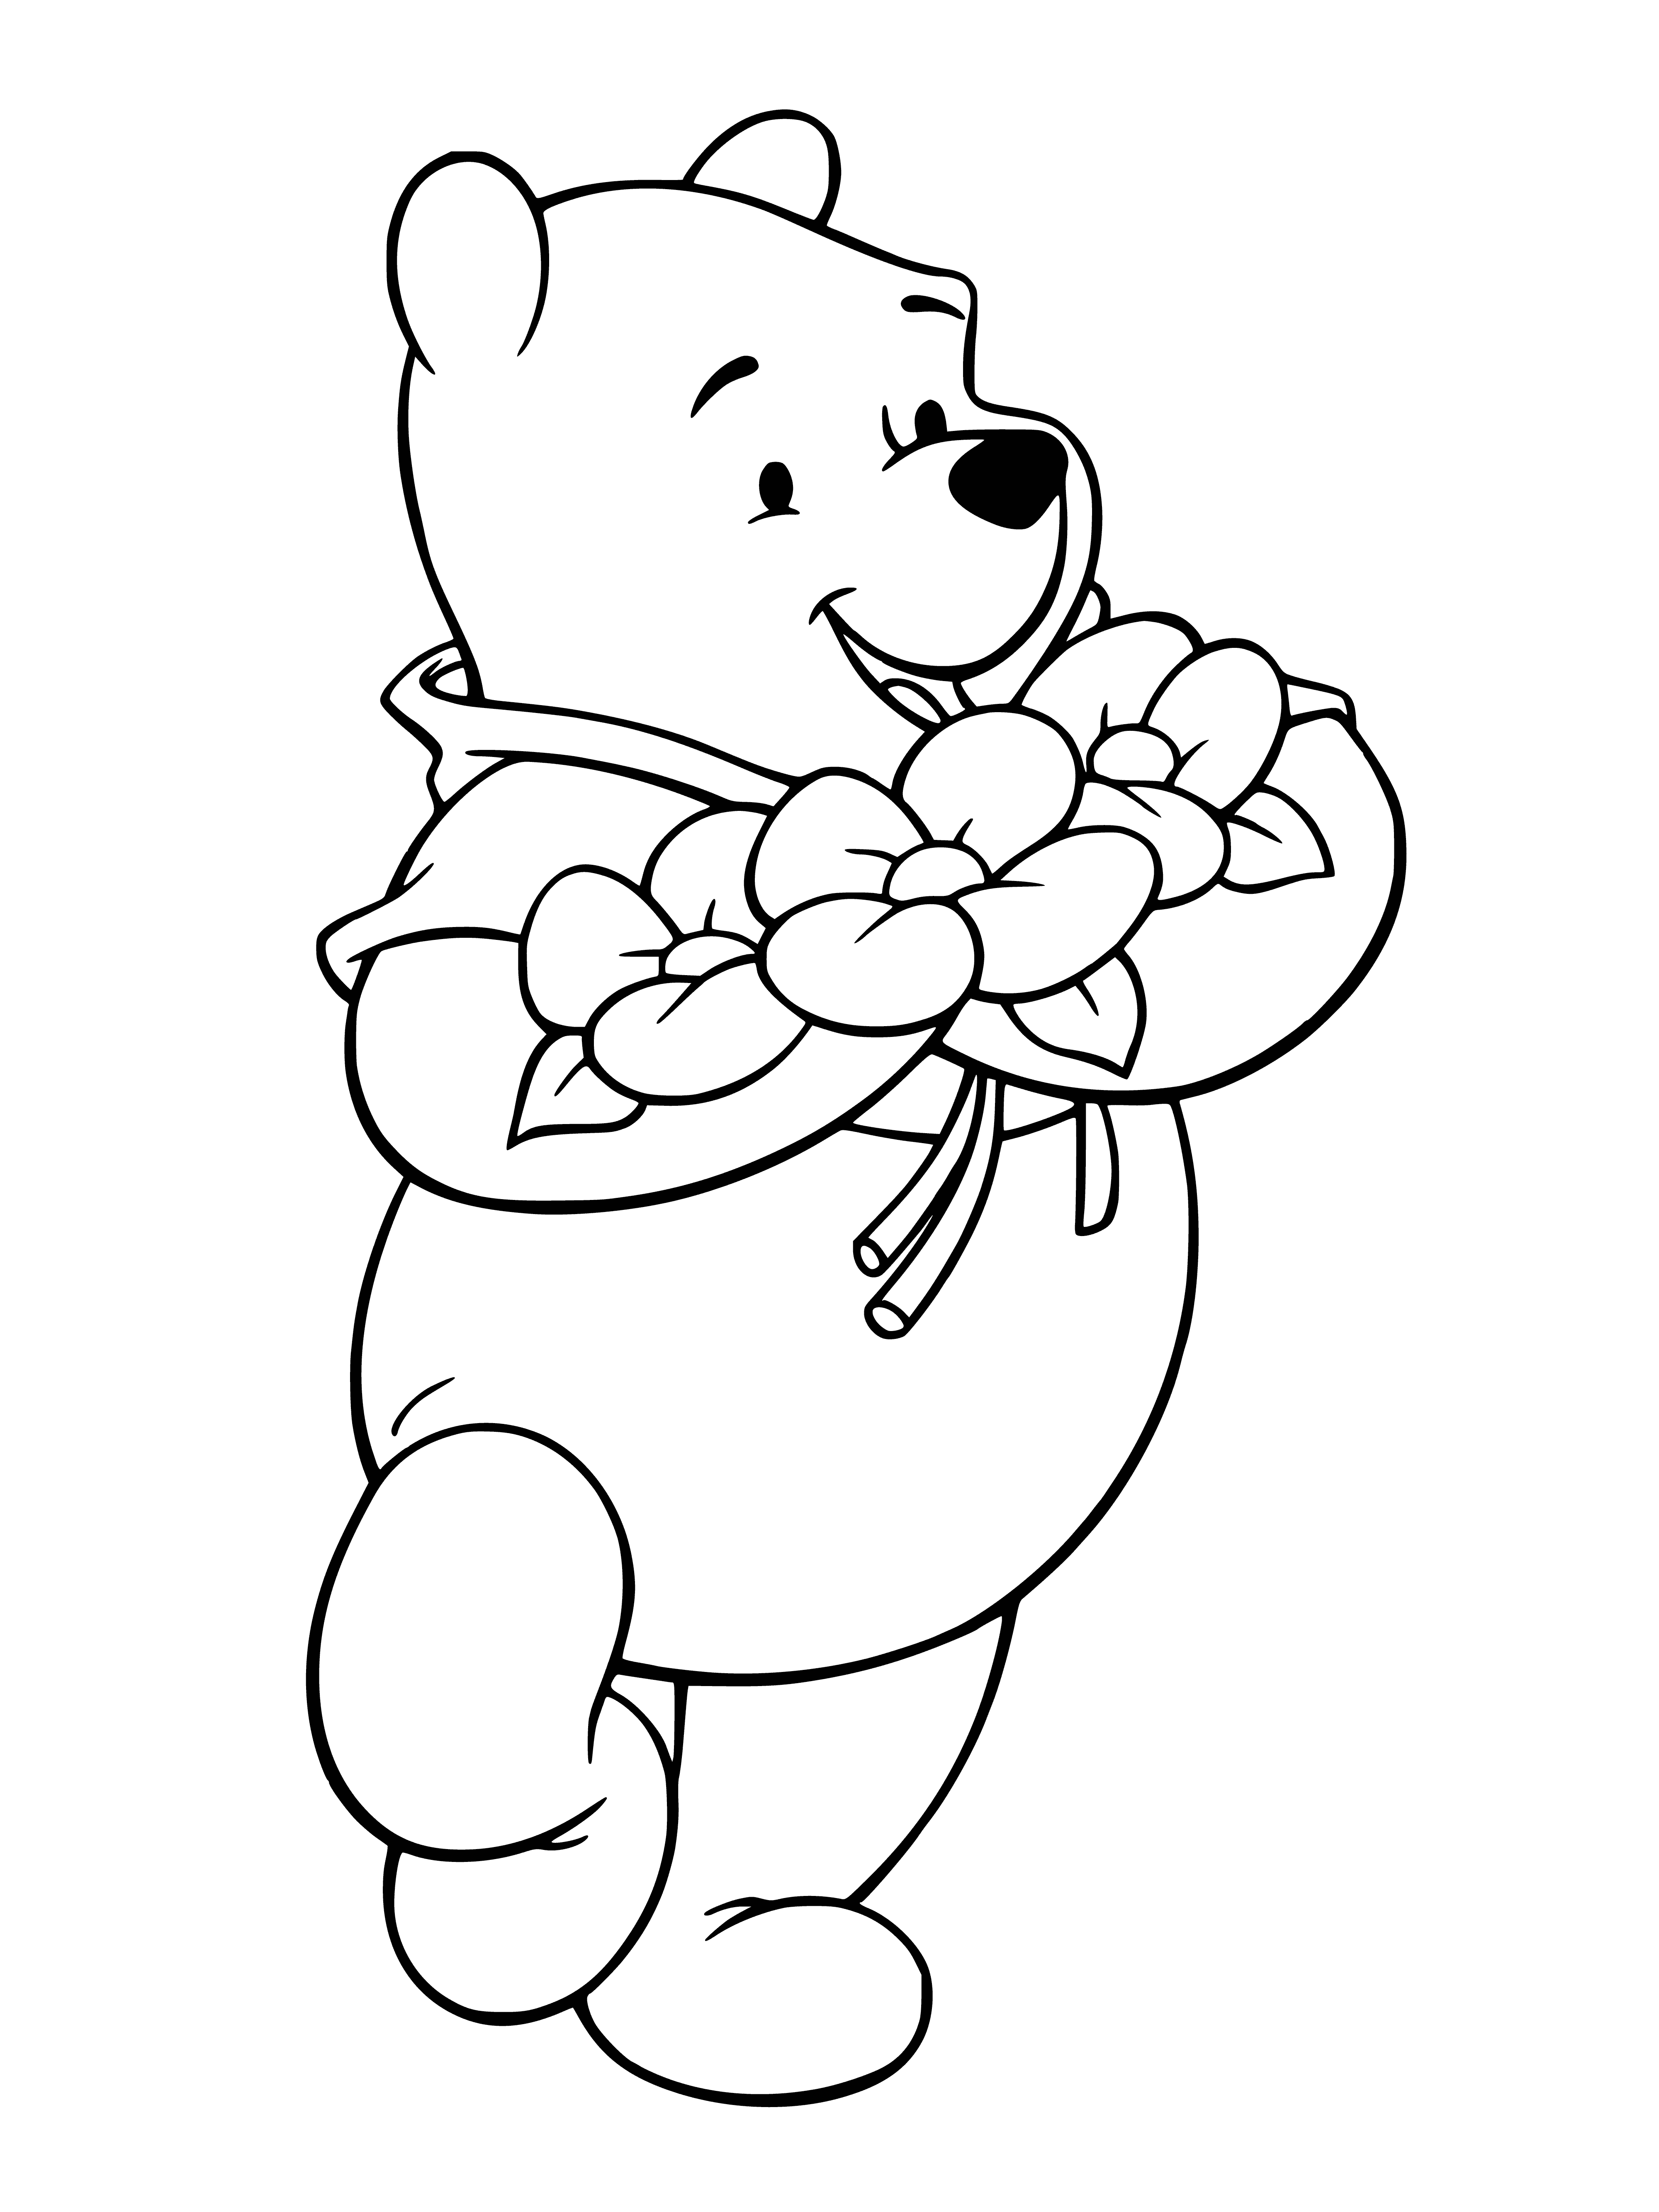 coloring page: Bear is holding a pot of yellow flowers in full bloom.